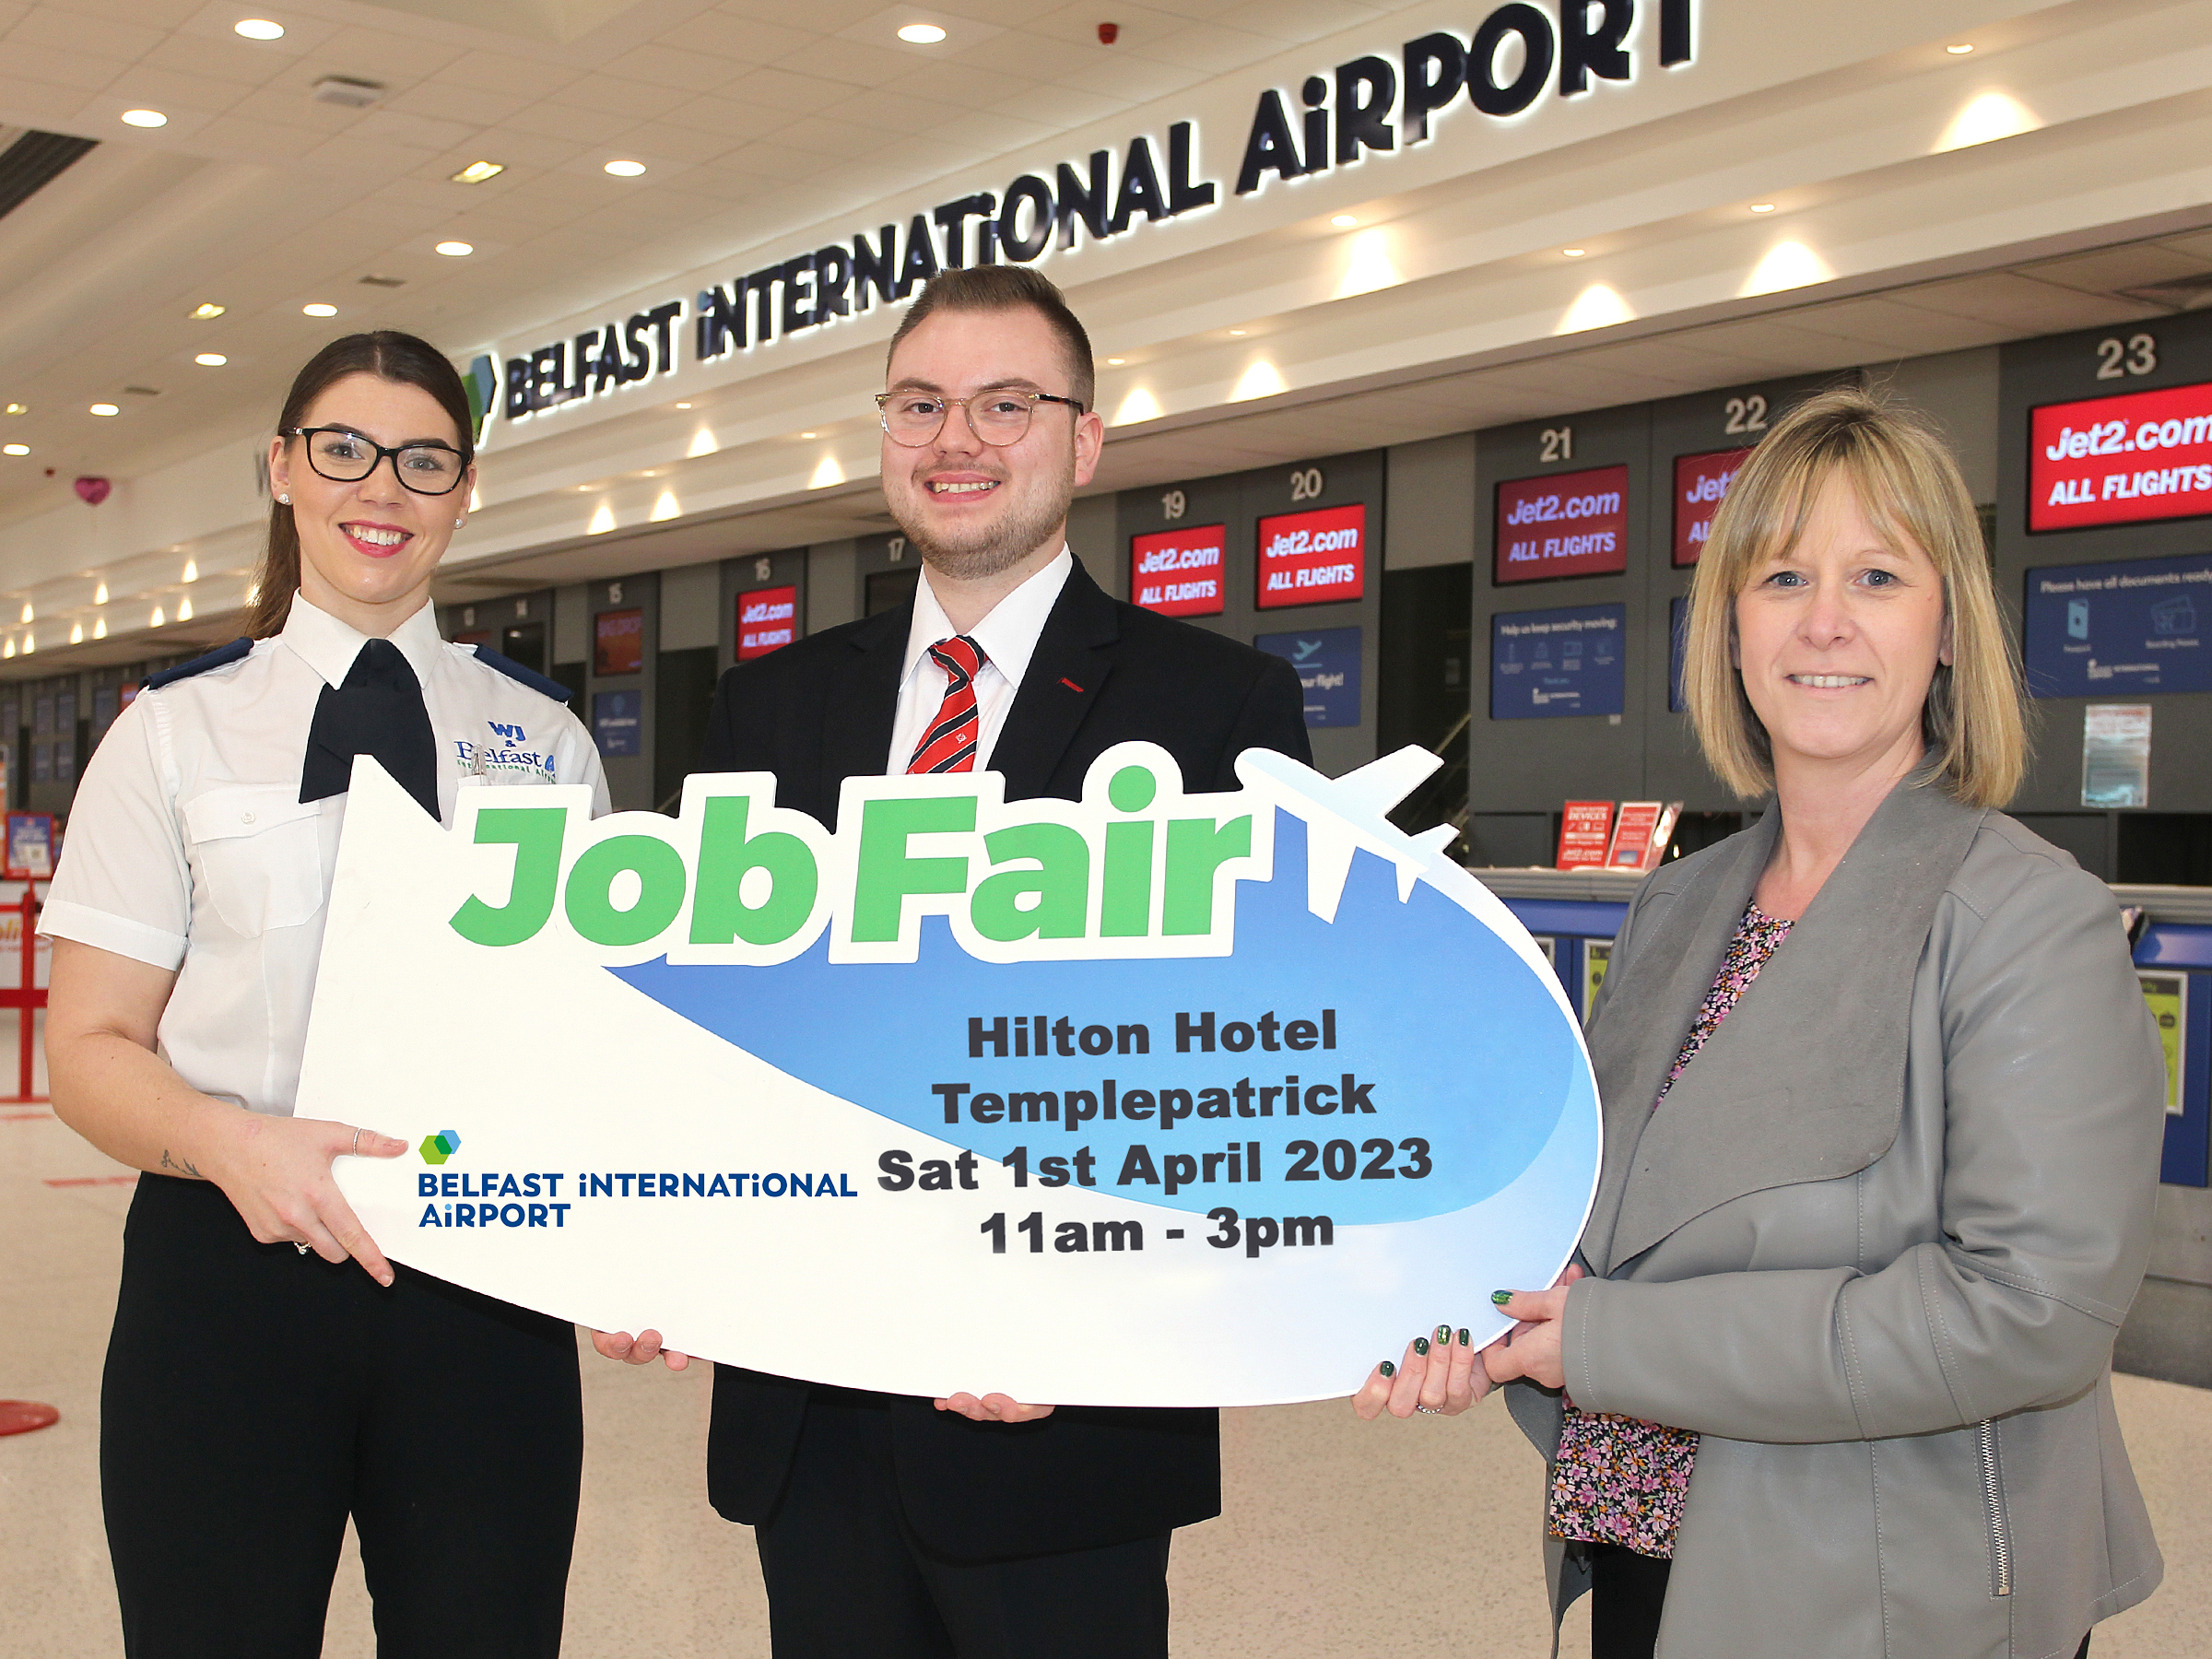 More Jobs on offer with Belfast International Airport   